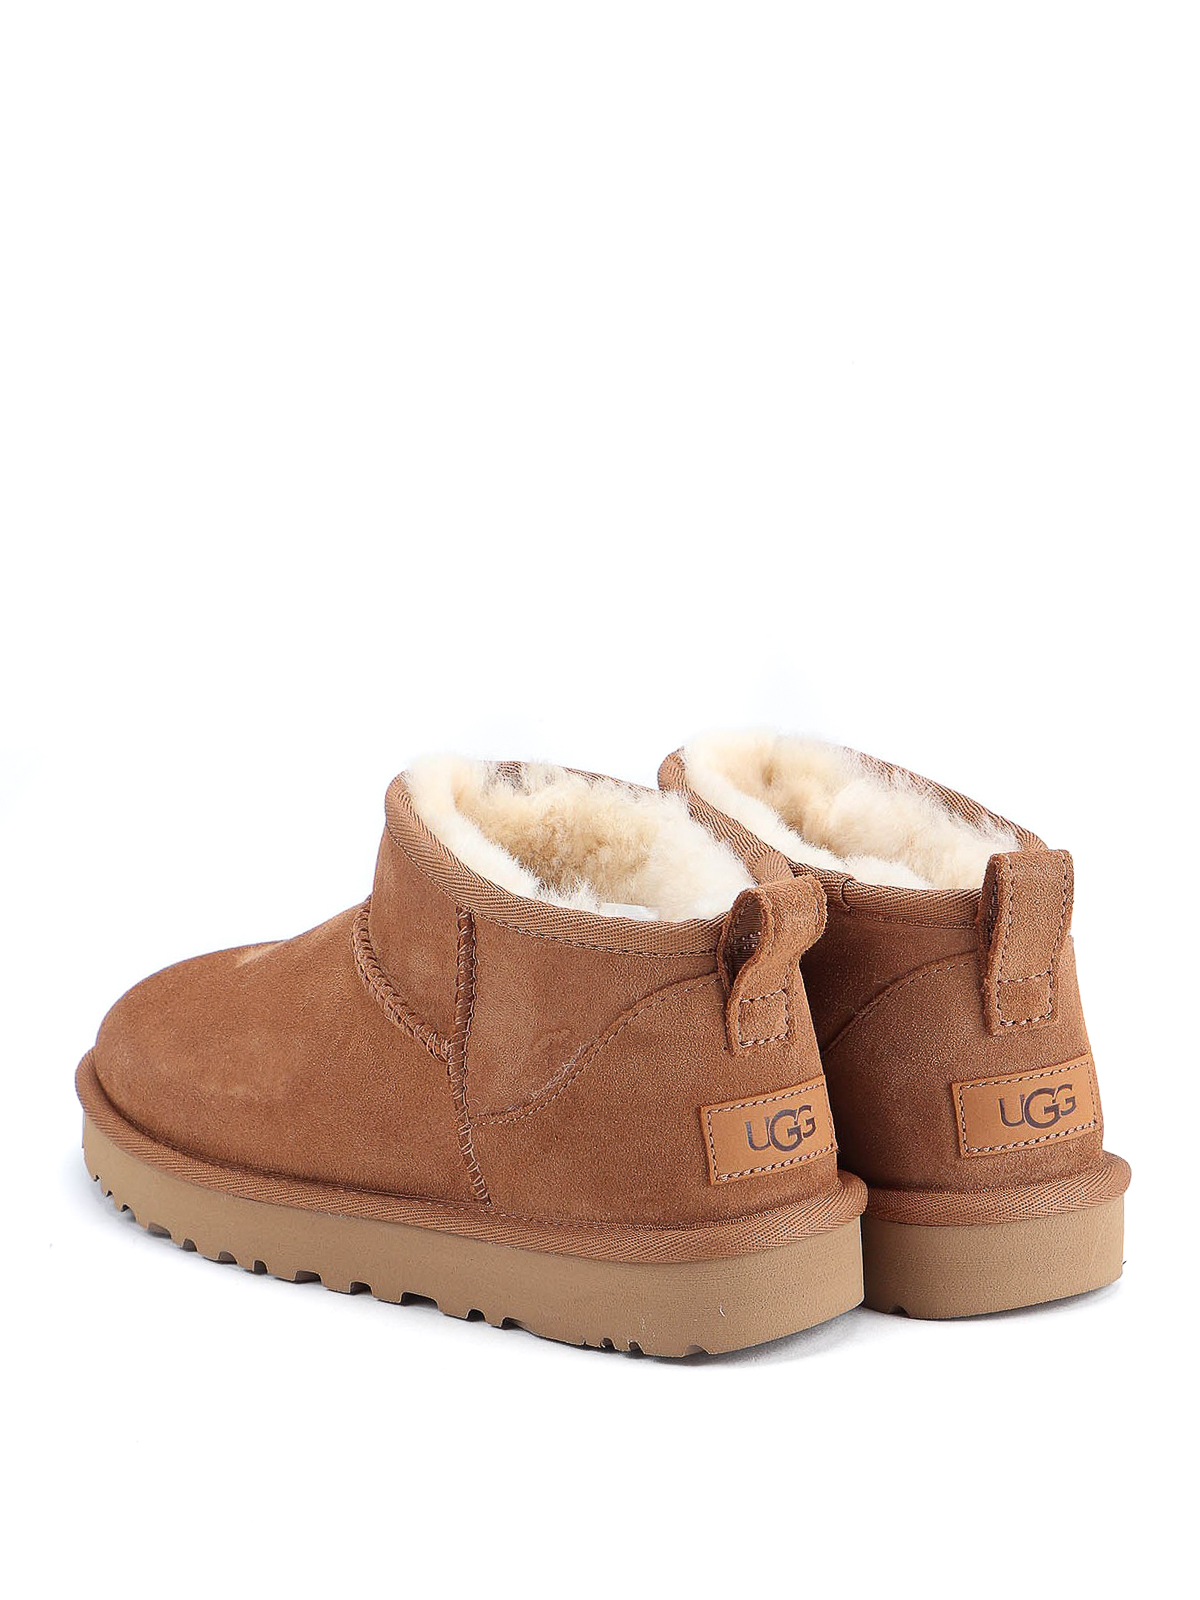 Ugg - Classic Ultra Mini ankle boots 